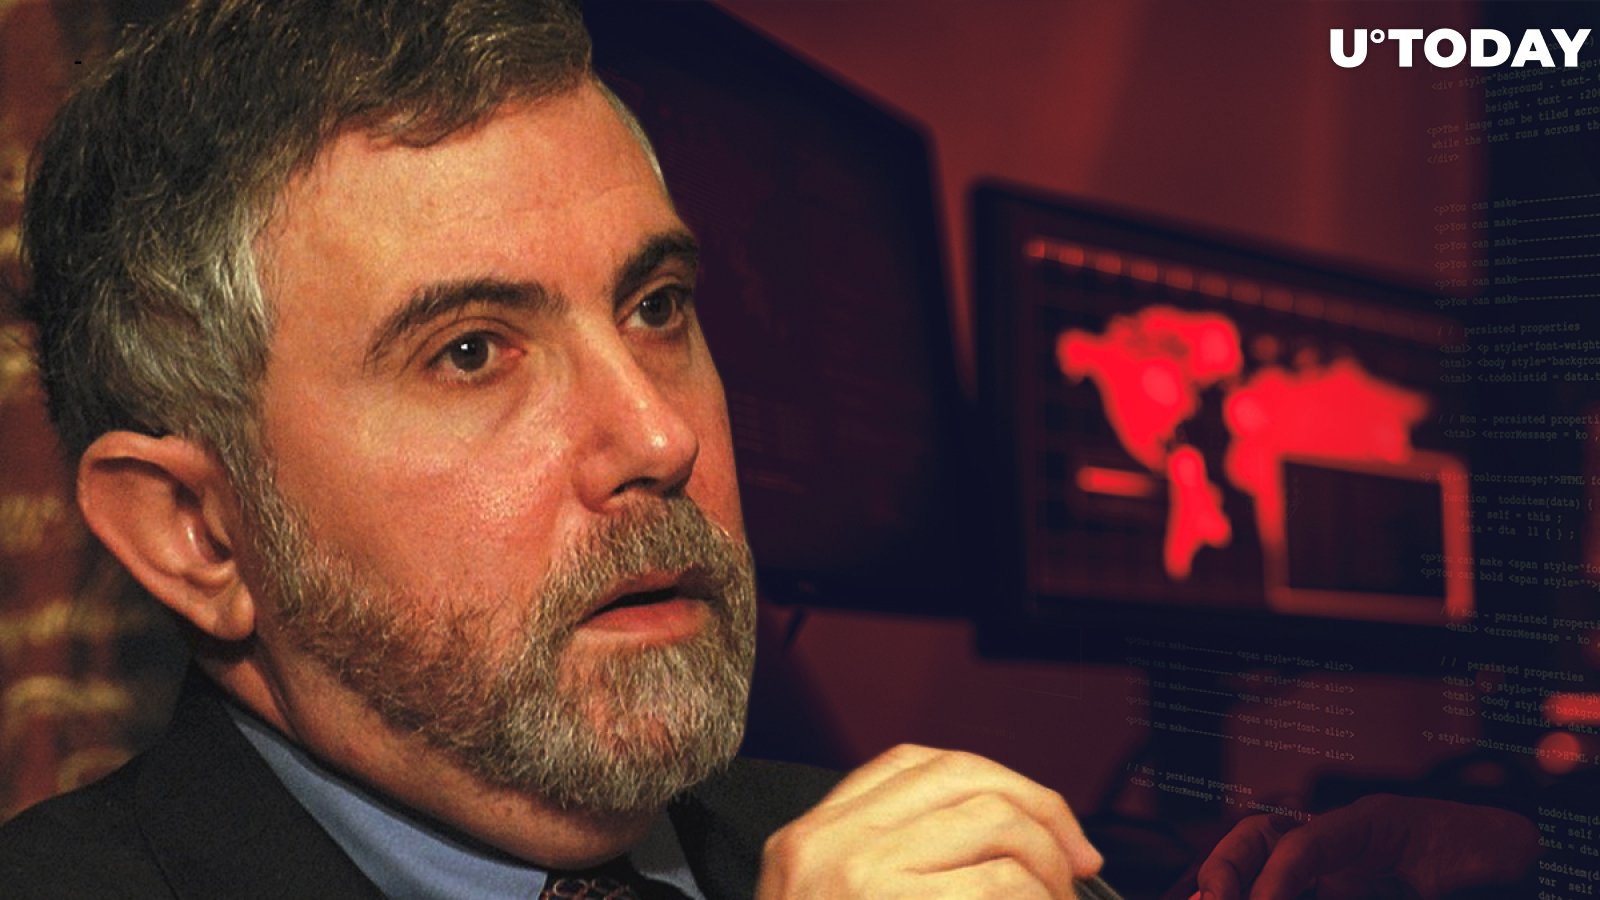 Bitcoin Hater Paul Krugman Becomes Target of Crypto Scammers